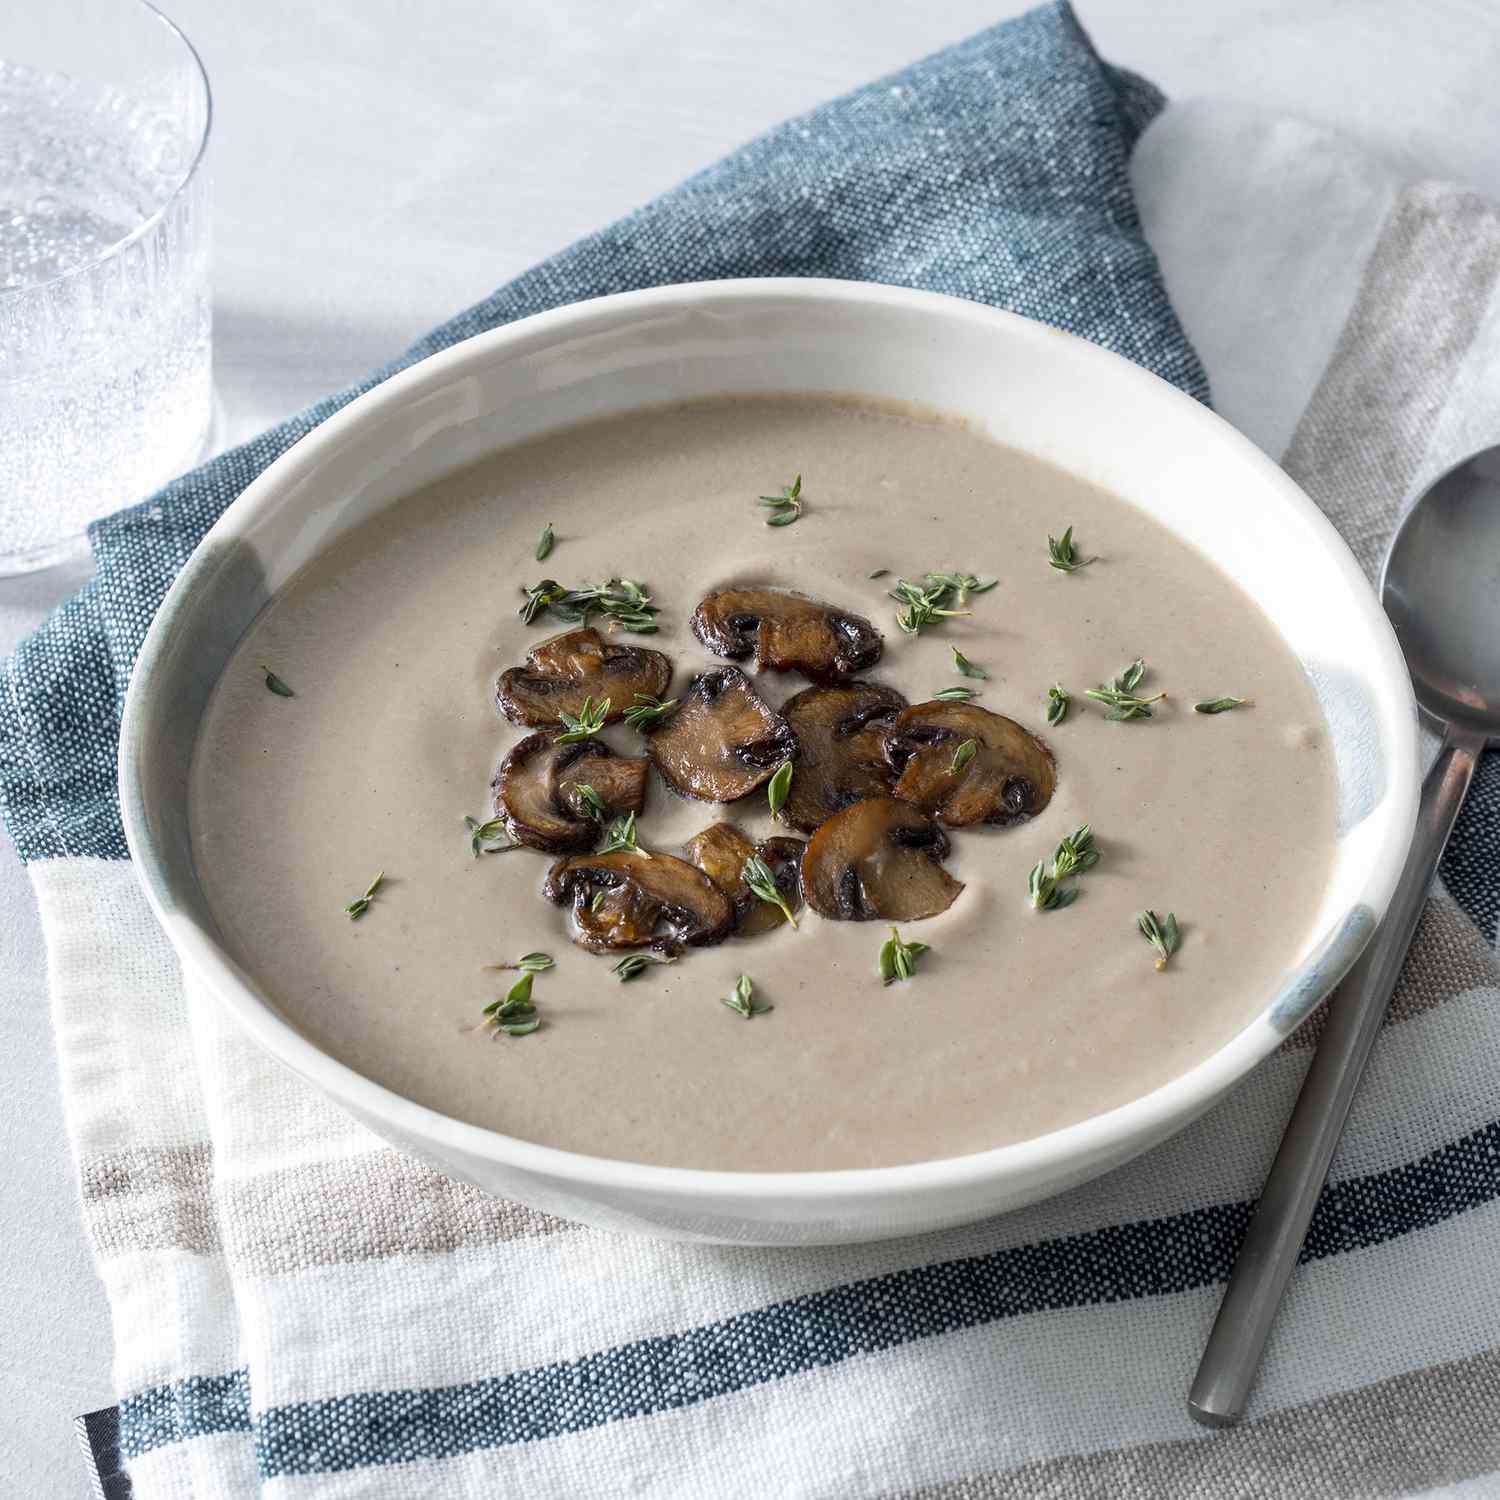 close up view of Creamy Mushroom Soup in a bowl on top of a kitchen towel, garnished with mushrooms and herbs